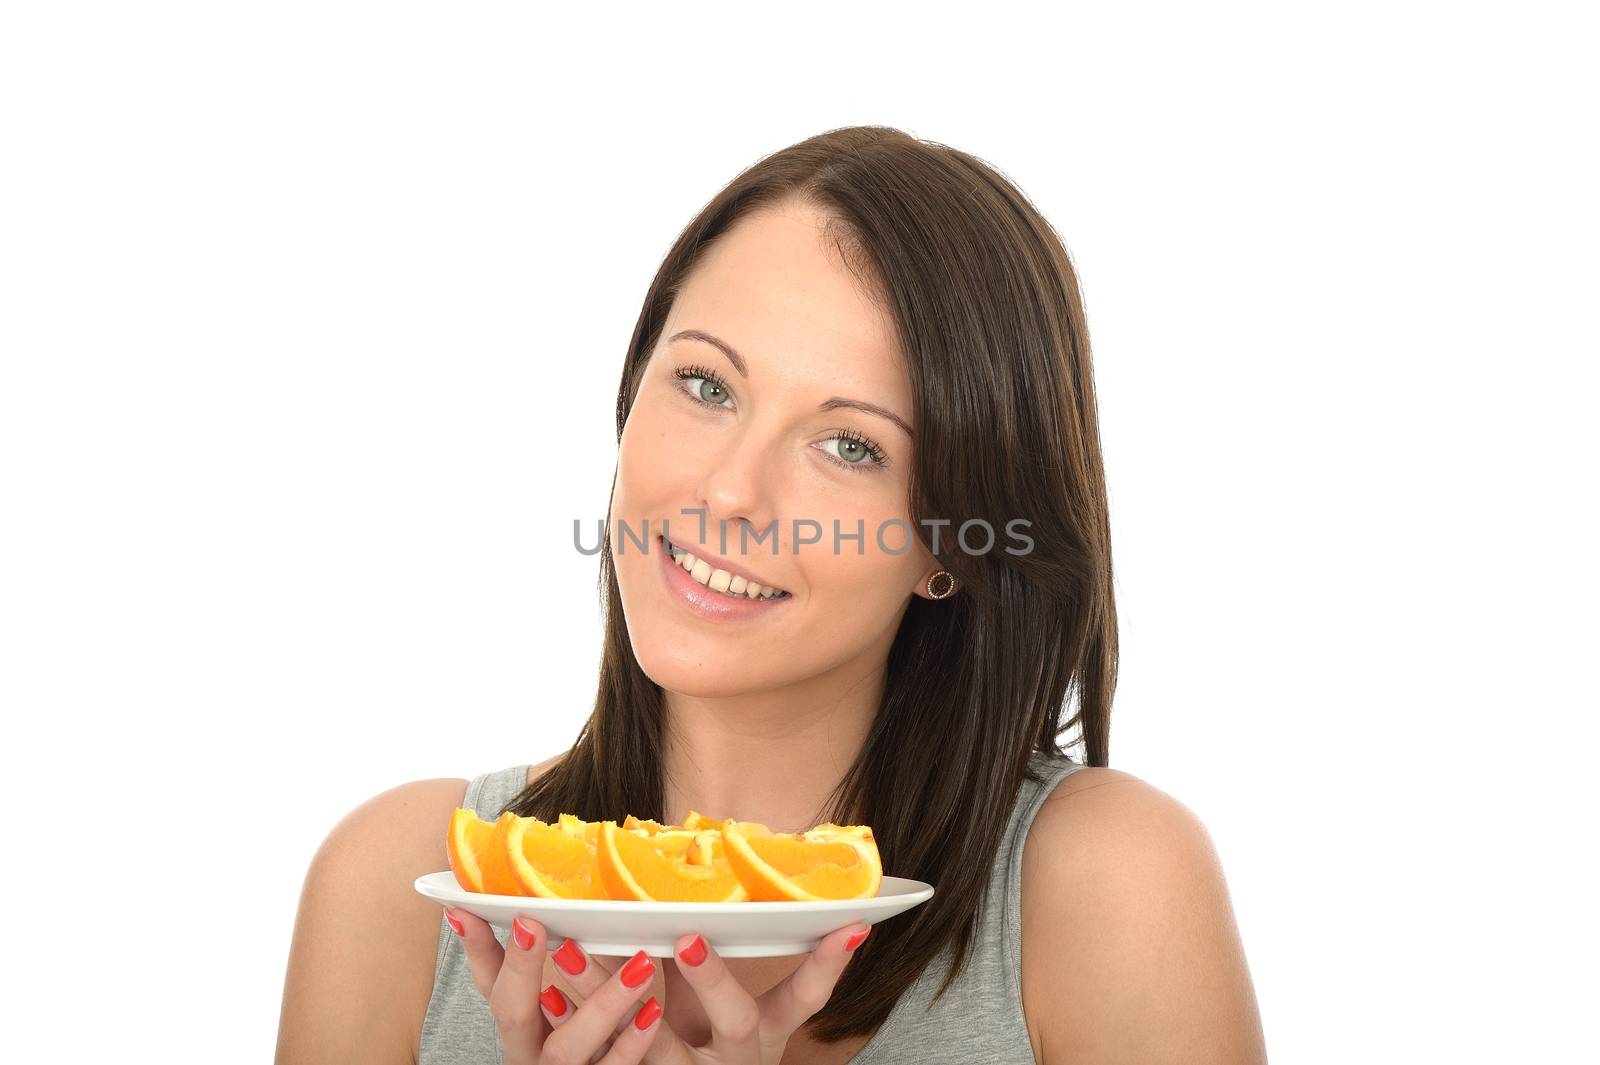 Attractive Young Woman Holding a Plate of Sliced Oranges by Whiteboxmedia